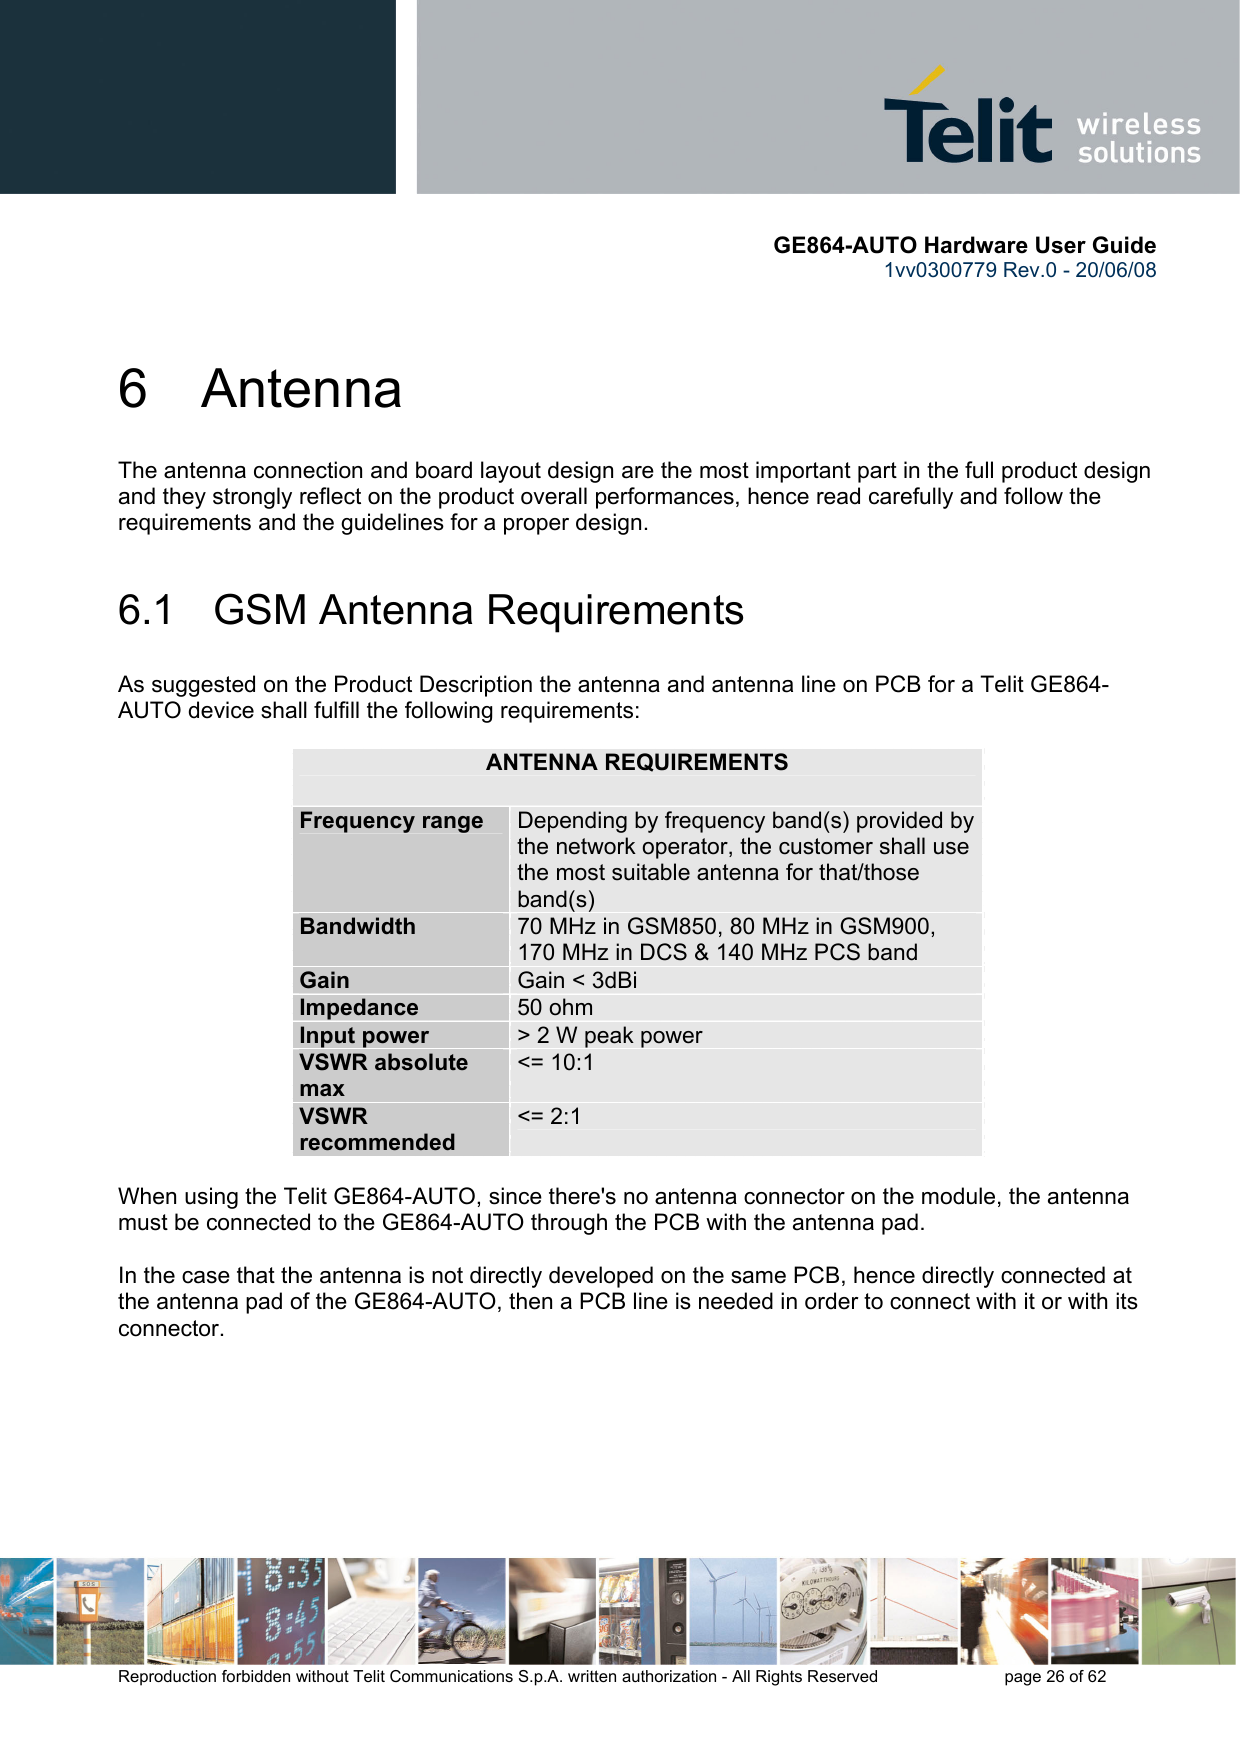       GE864-AUTO Hardware User Guide 1vv0300779 Rev.0 - 20/06/08      Reproduction forbidden without Telit Communications S.p.A. written authorization - All Rights Reserved    page 26 of 62  6 Antenna The antenna connection and board layout design are the most important part in the full product design and they strongly reflect on the product overall performances, hence read carefully and follow the requirements and the guidelines for a proper design. 6.1   GSM Antenna Requirements As suggested on the Product Description the antenna and antenna line on PCB for a Telit GE864-AUTO device shall fulfill the following requirements:   ANTENNA REQUIREMENTS Frequency range  Depending by frequency band(s) provided by the network operator, the customer shall use the most suitable antenna for that/those band(s) Bandwidth  70 MHz in GSM850, 80 MHz in GSM900, 170 MHz in DCS &amp; 140 MHz PCS band Gain  Gain &lt; 3dBi Impedance  50 ohm Input power  &gt; 2 W peak power VSWR absolute max &lt;= 10:1 VSWR recommended &lt;= 2:1  When using the Telit GE864-AUTO, since there&apos;s no antenna connector on the module, the antenna must be connected to the GE864-AUTO through the PCB with the antenna pad.  In the case that the antenna is not directly developed on the same PCB, hence directly connected at the antenna pad of the GE864-AUTO, then a PCB line is needed in order to connect with it or with its connector.   